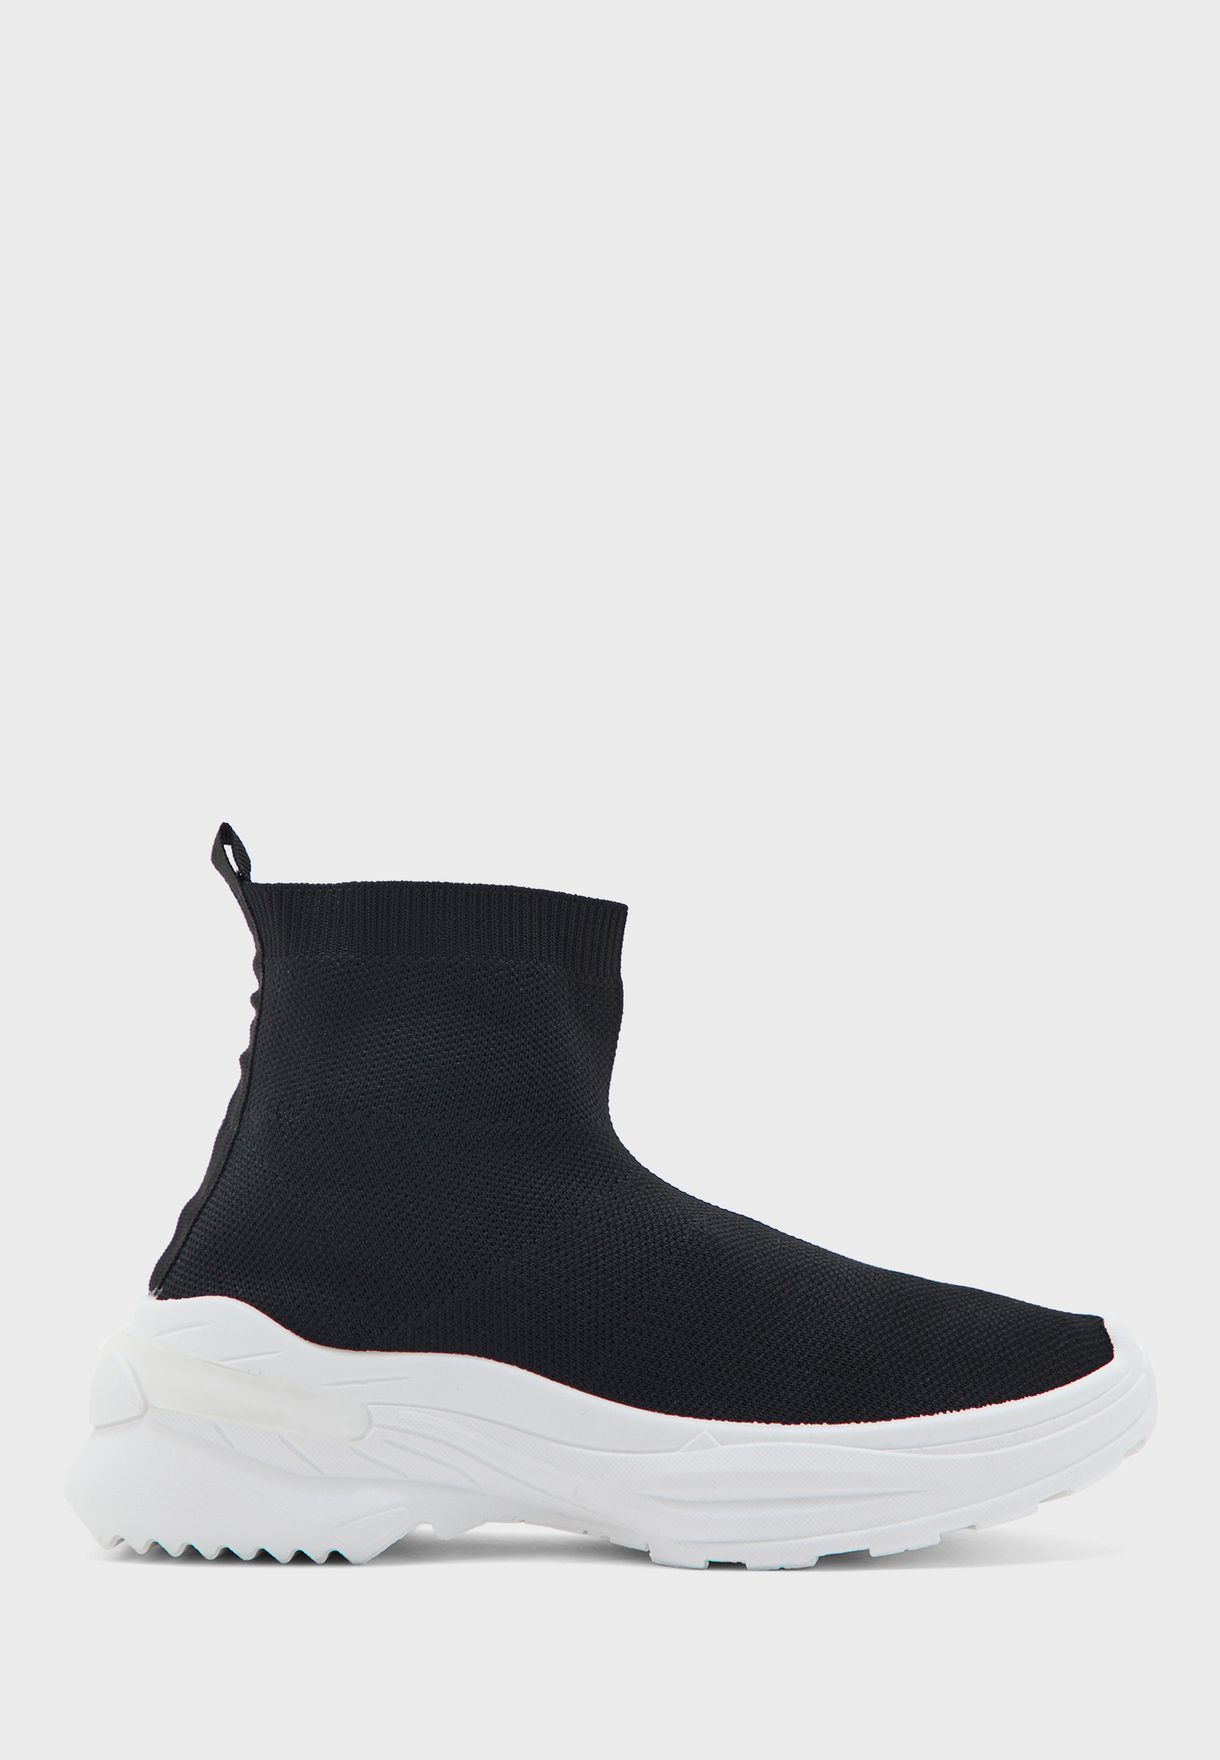 10 Sneakers That Are As Cozy As Your Favorite Socks GQ | lupon.gov.ph